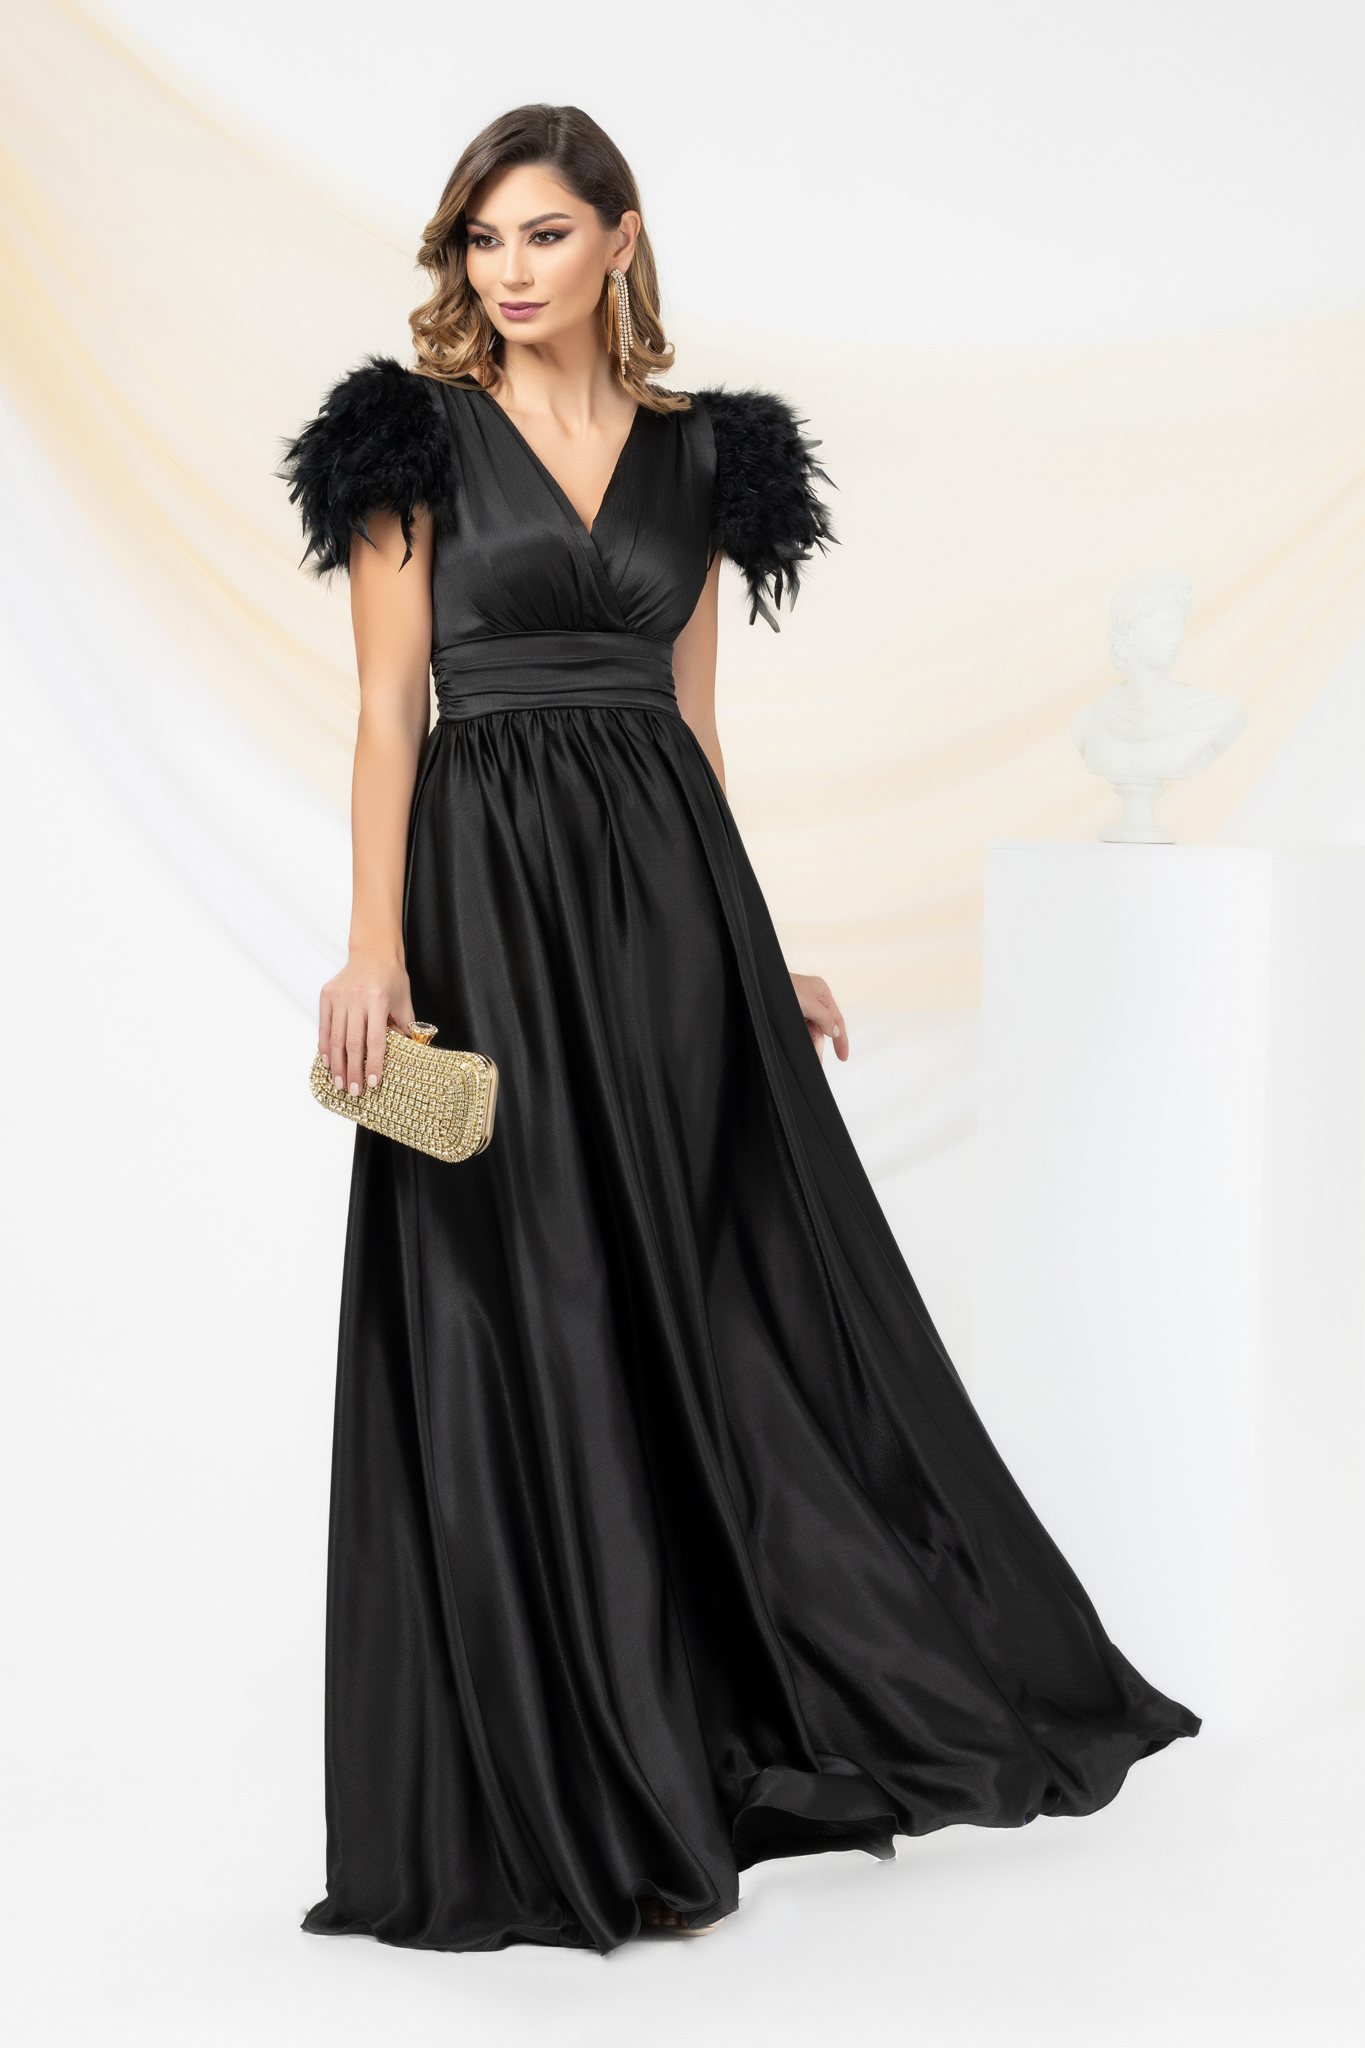 Long satin voile dress in black with feathered shoulders - PrettyGirl